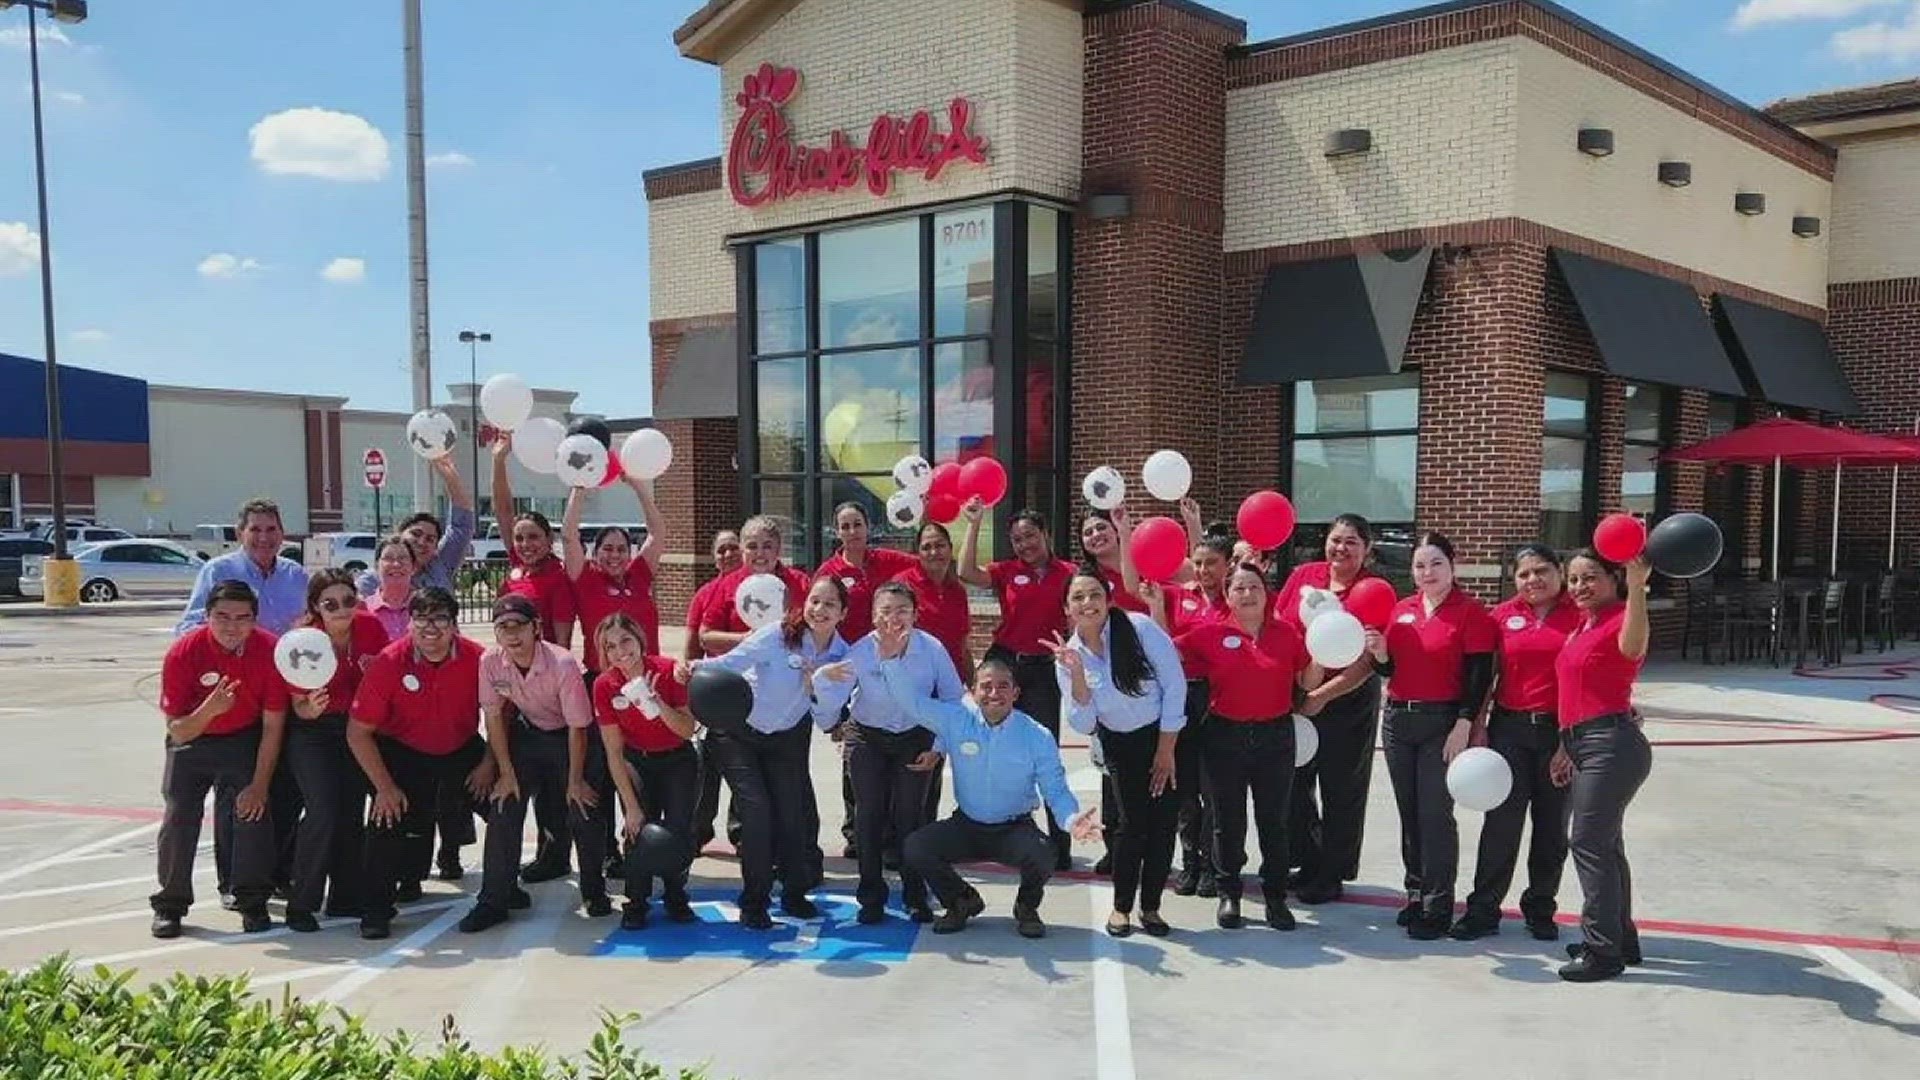 The Chick-fil-A on Memorial Blvd. in Port Arthur is officially back open after being closed since June for remodeling.